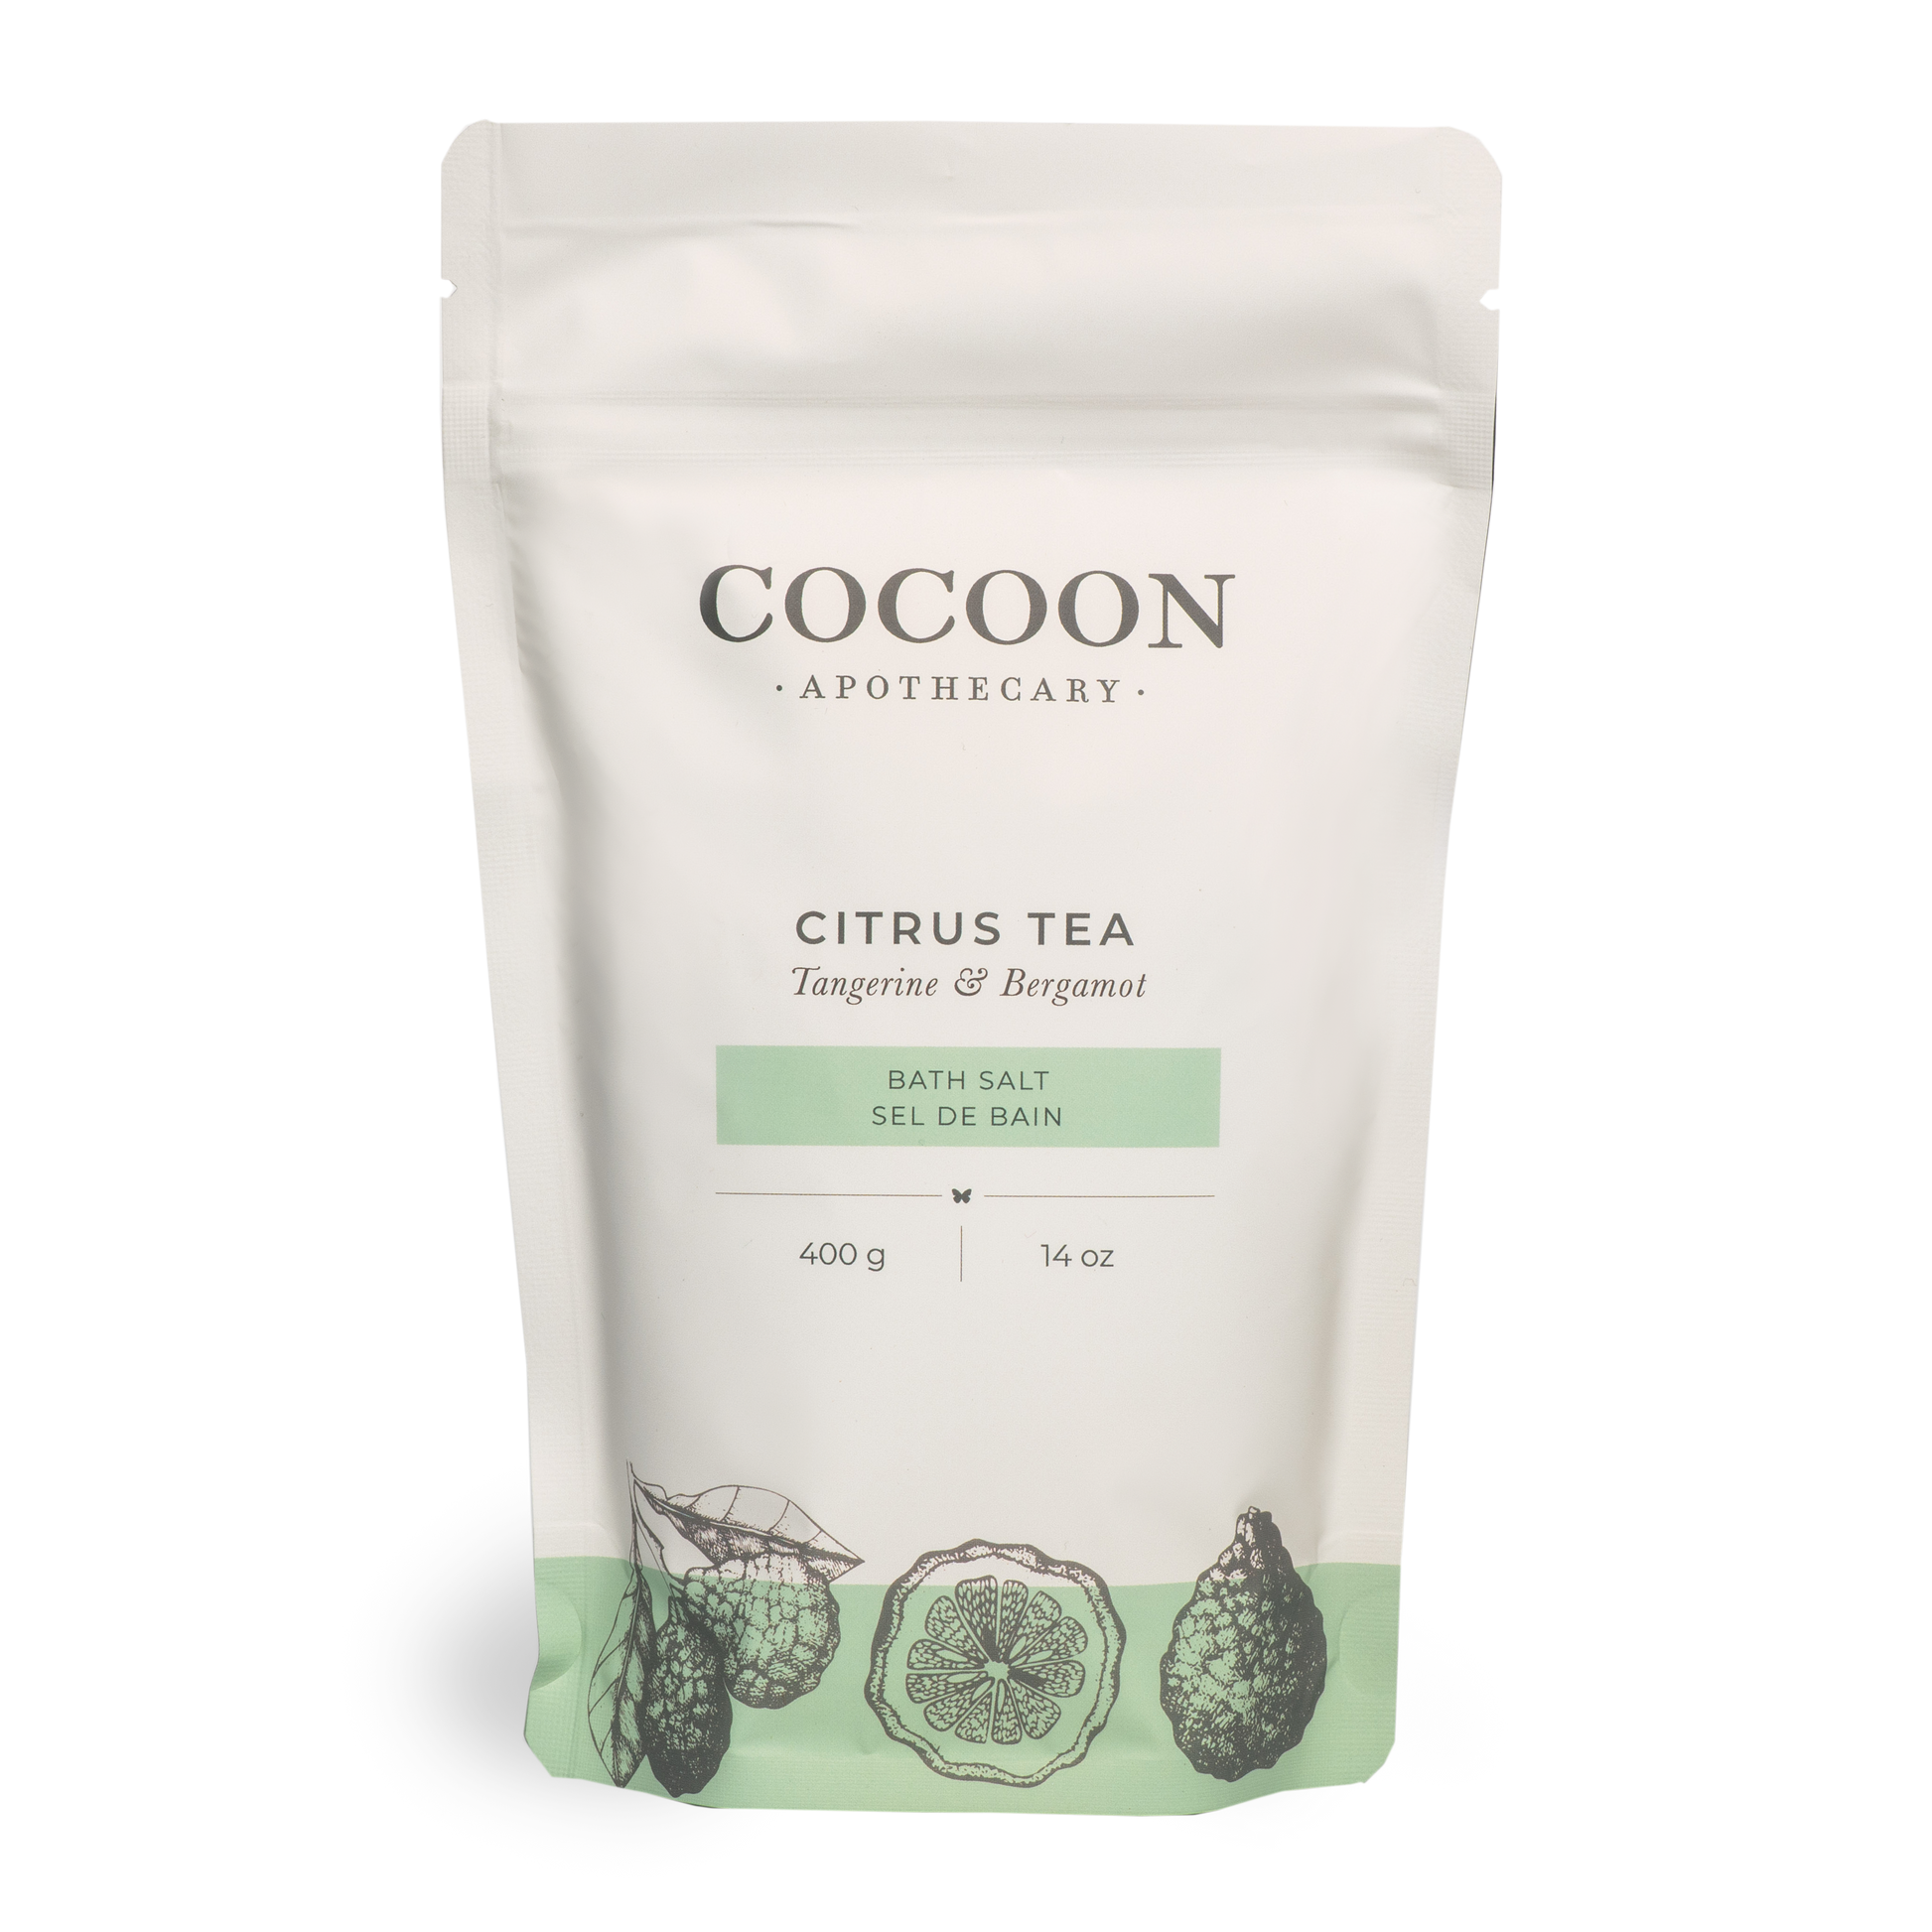 Mineral rich Dead Sea salts, Epsom salts and pure essential oils creates a spa-like bathing experience. Citrus Tea has a soft tea-like citrus aroma that is cheery and uplifting.